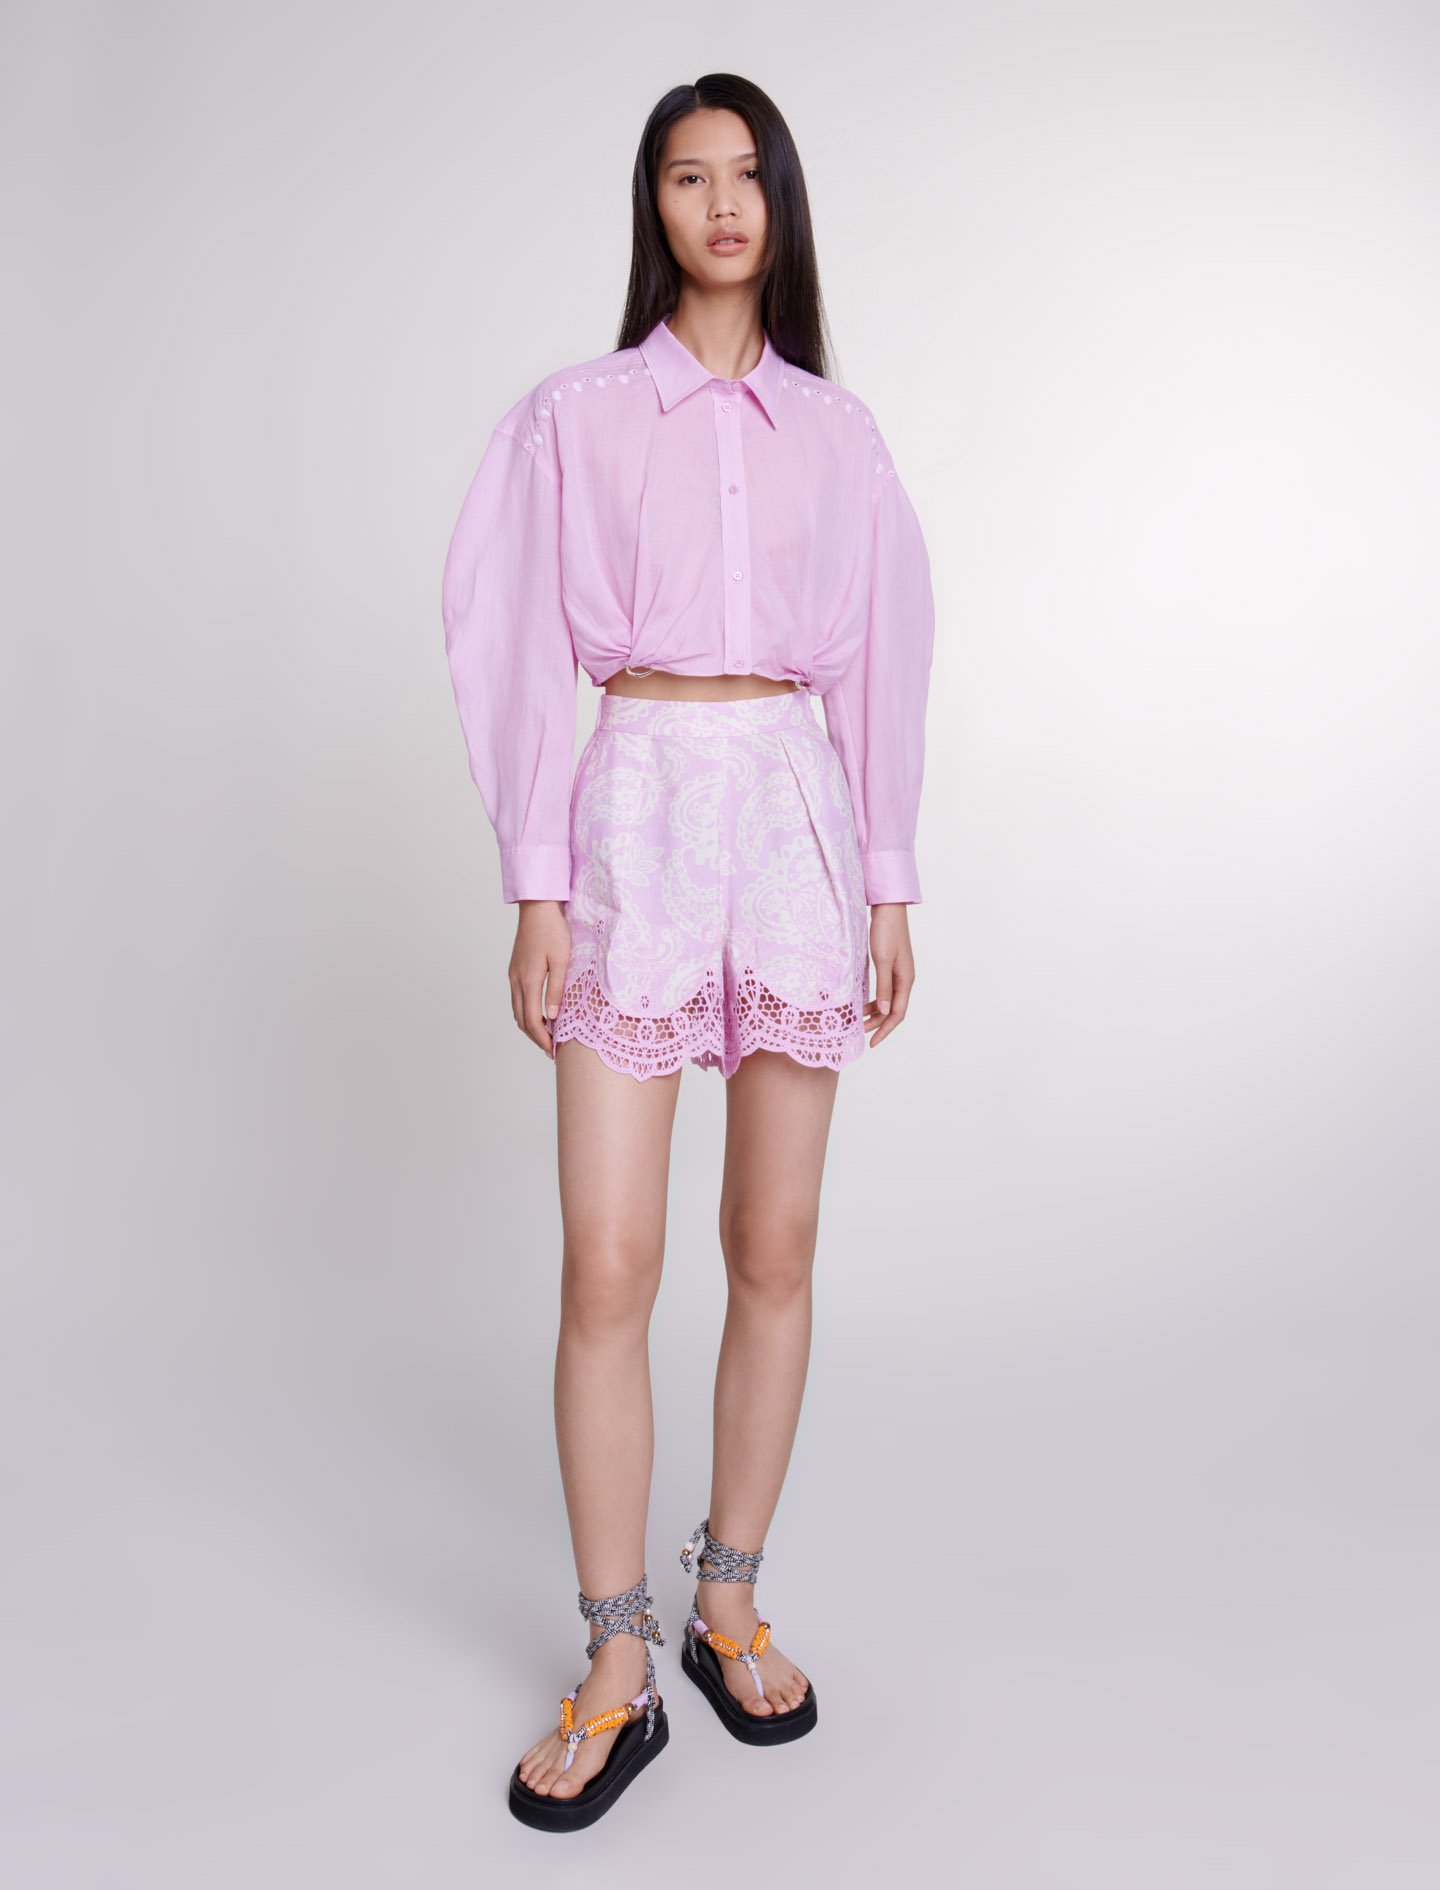 Maje Woman's ramie Buttons: Ramie cropped shirt for Spring/Summer, in color Pink / Red